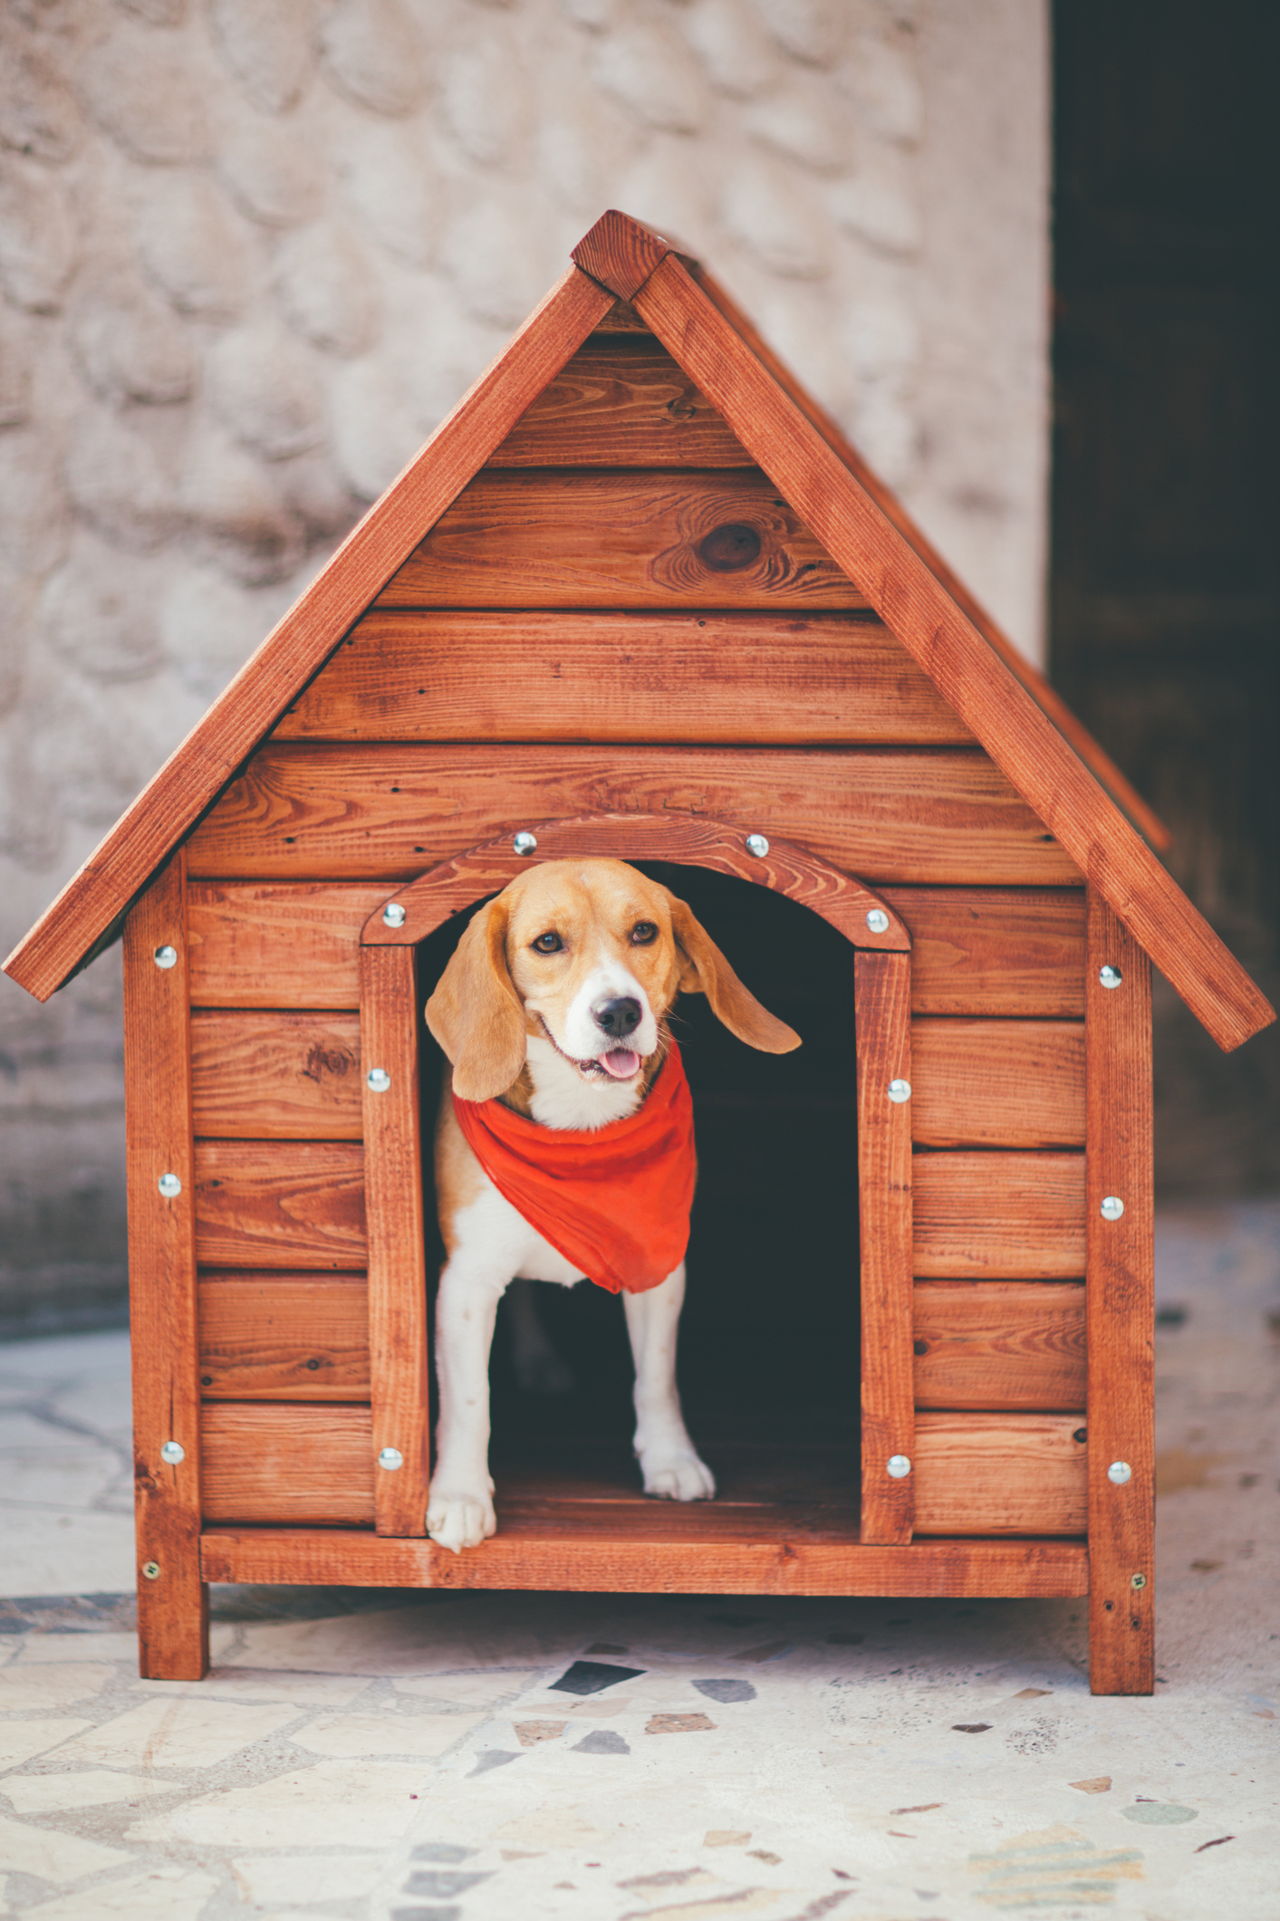 A Visual Guide on How to Build a Dog House in 8 Simple ...